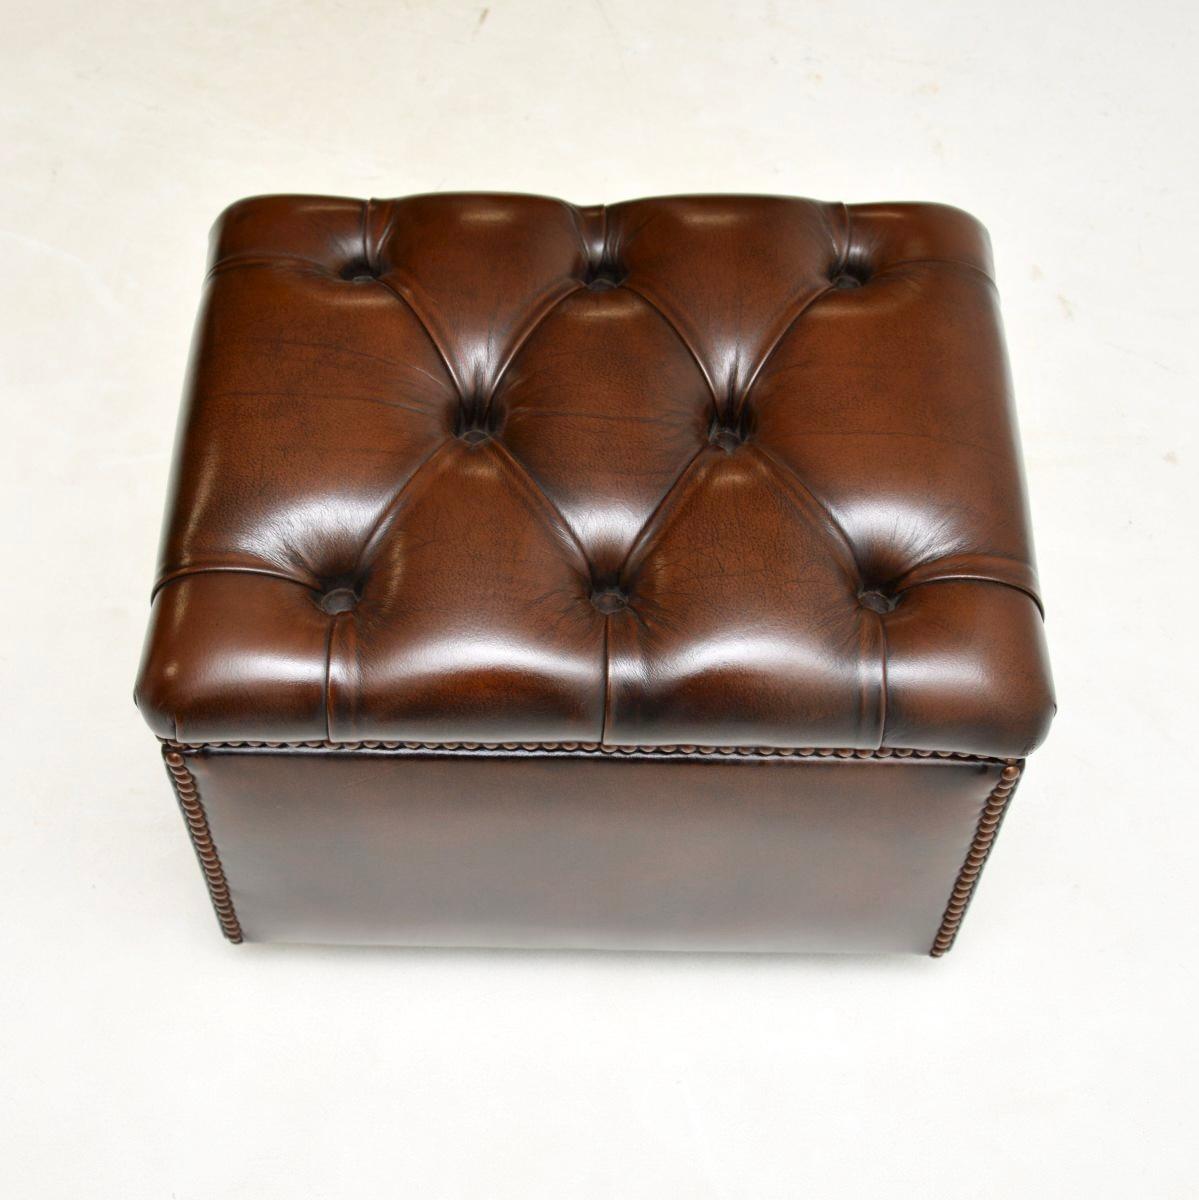 Mid-20th Century Antique Leather Foot Stool / Ottoman For Sale